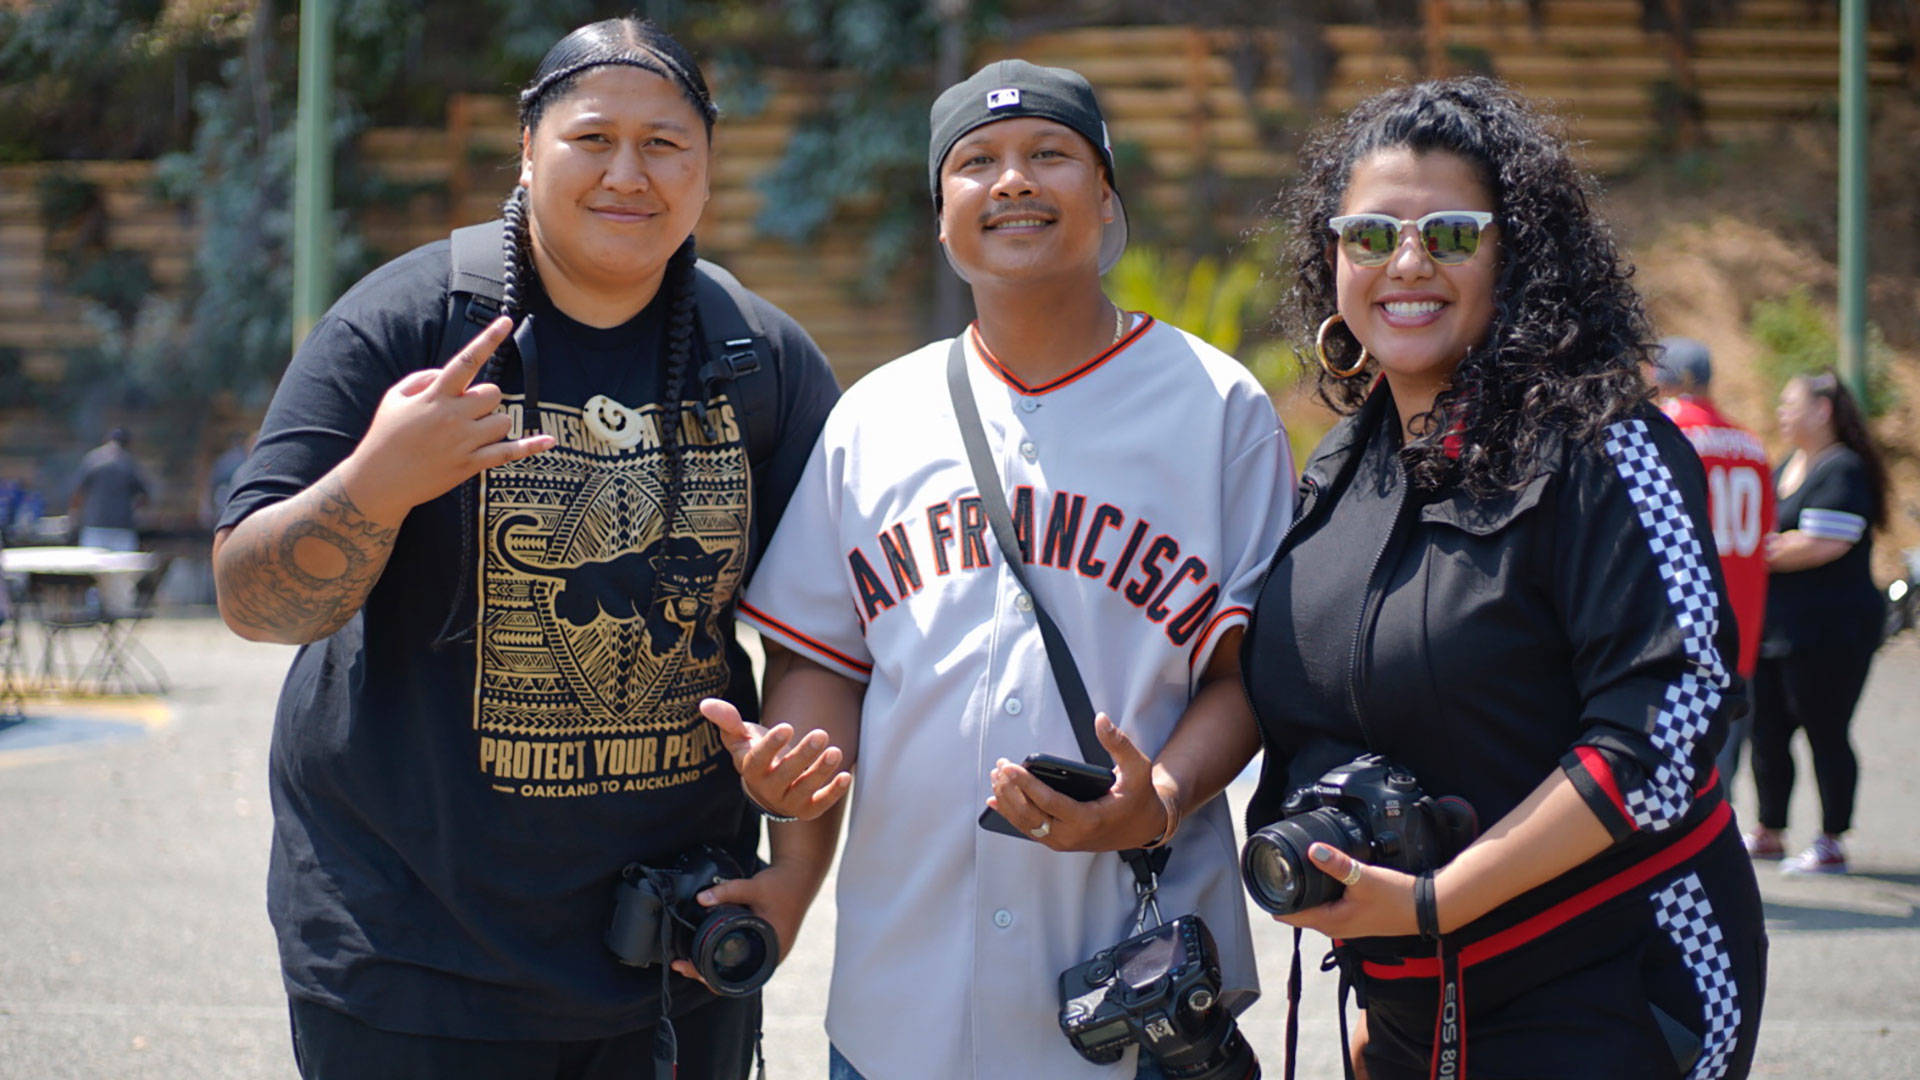 Jean Melesaine, left, with friends at the 'All My Usos' barbecue at Gilman Park in Bayview / Hunters Point. Pendarvis Harshaw